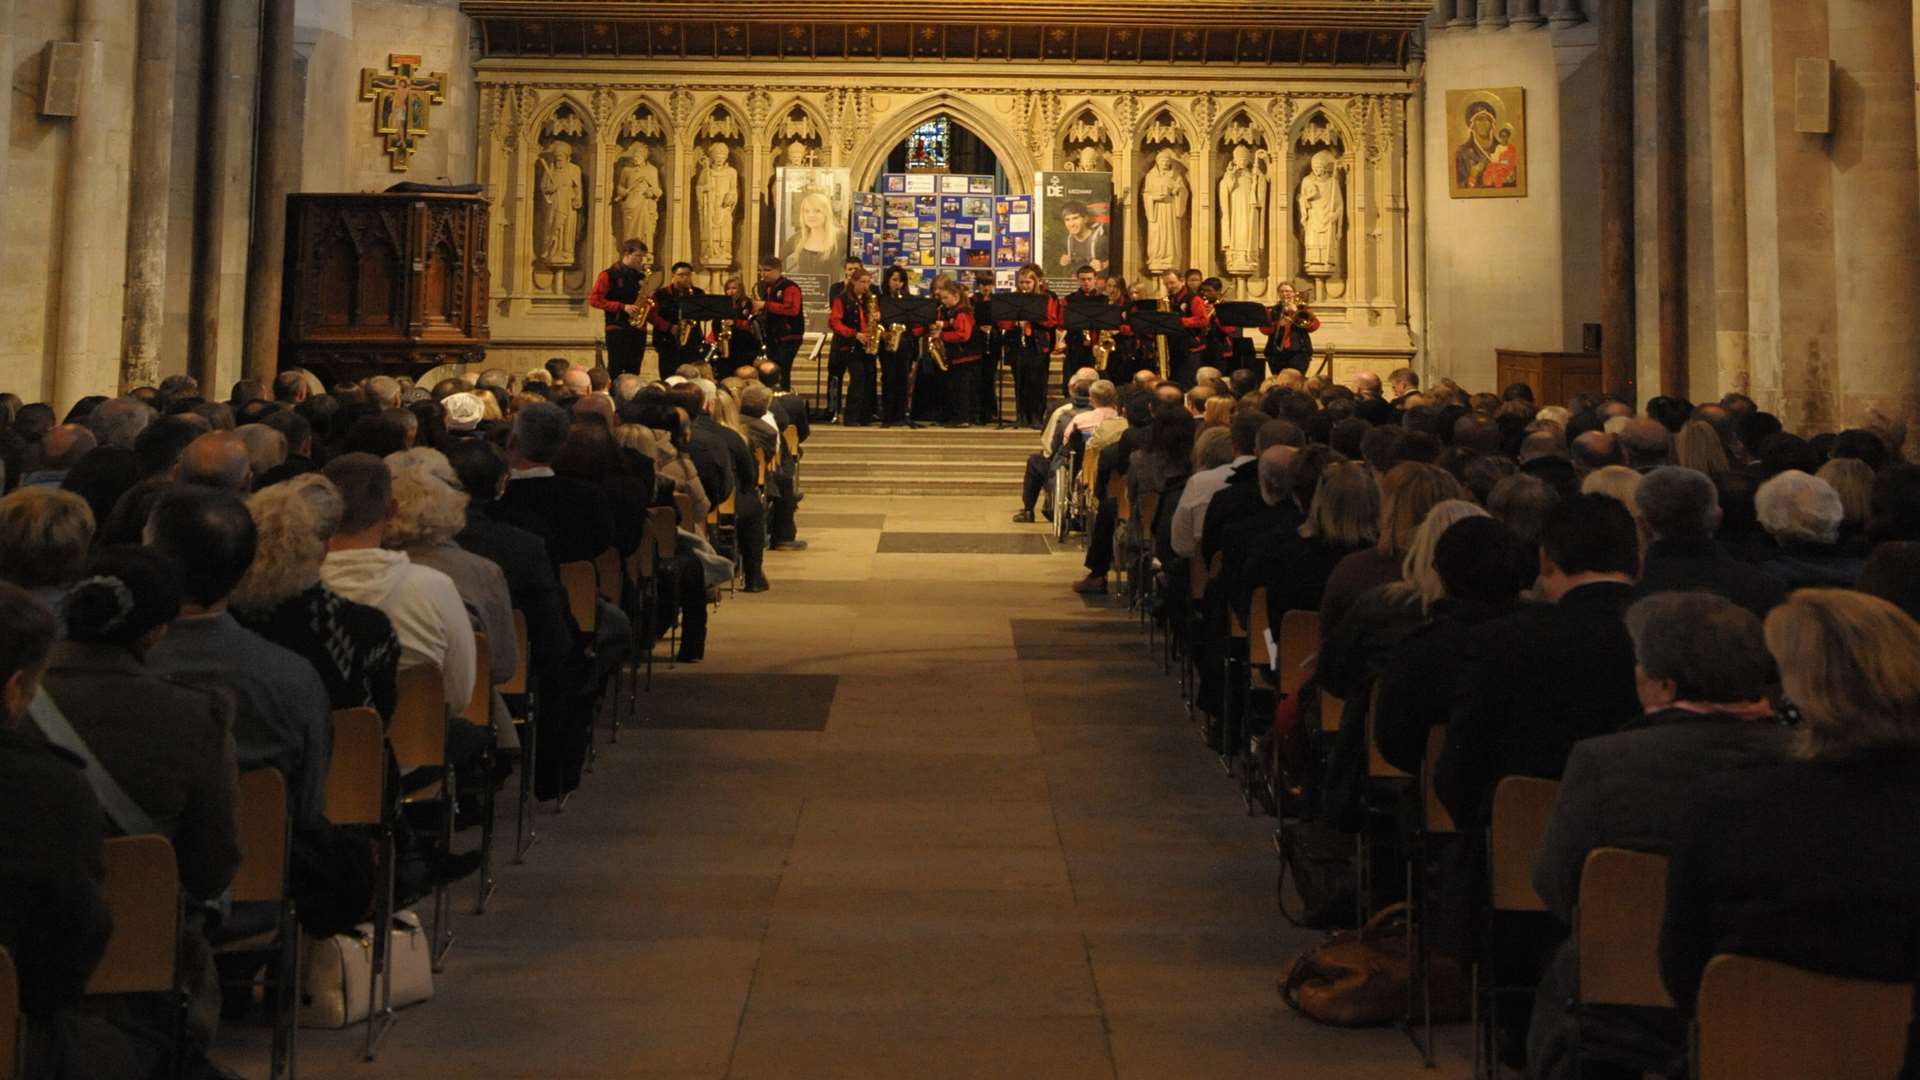 Medway DofE hold two presentation evenings at year at Rochester Cathedral